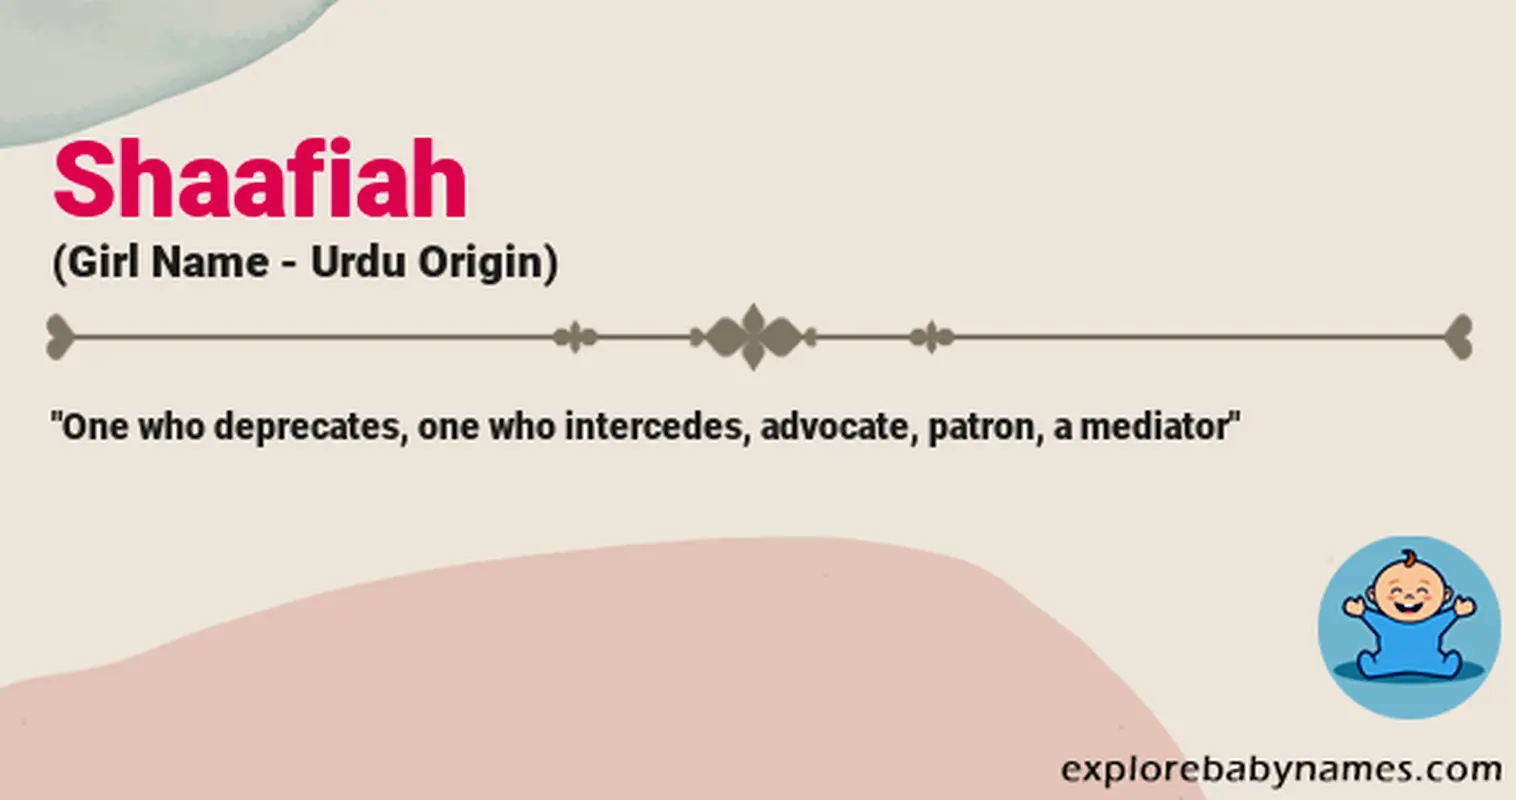 Meaning of Shaafiah